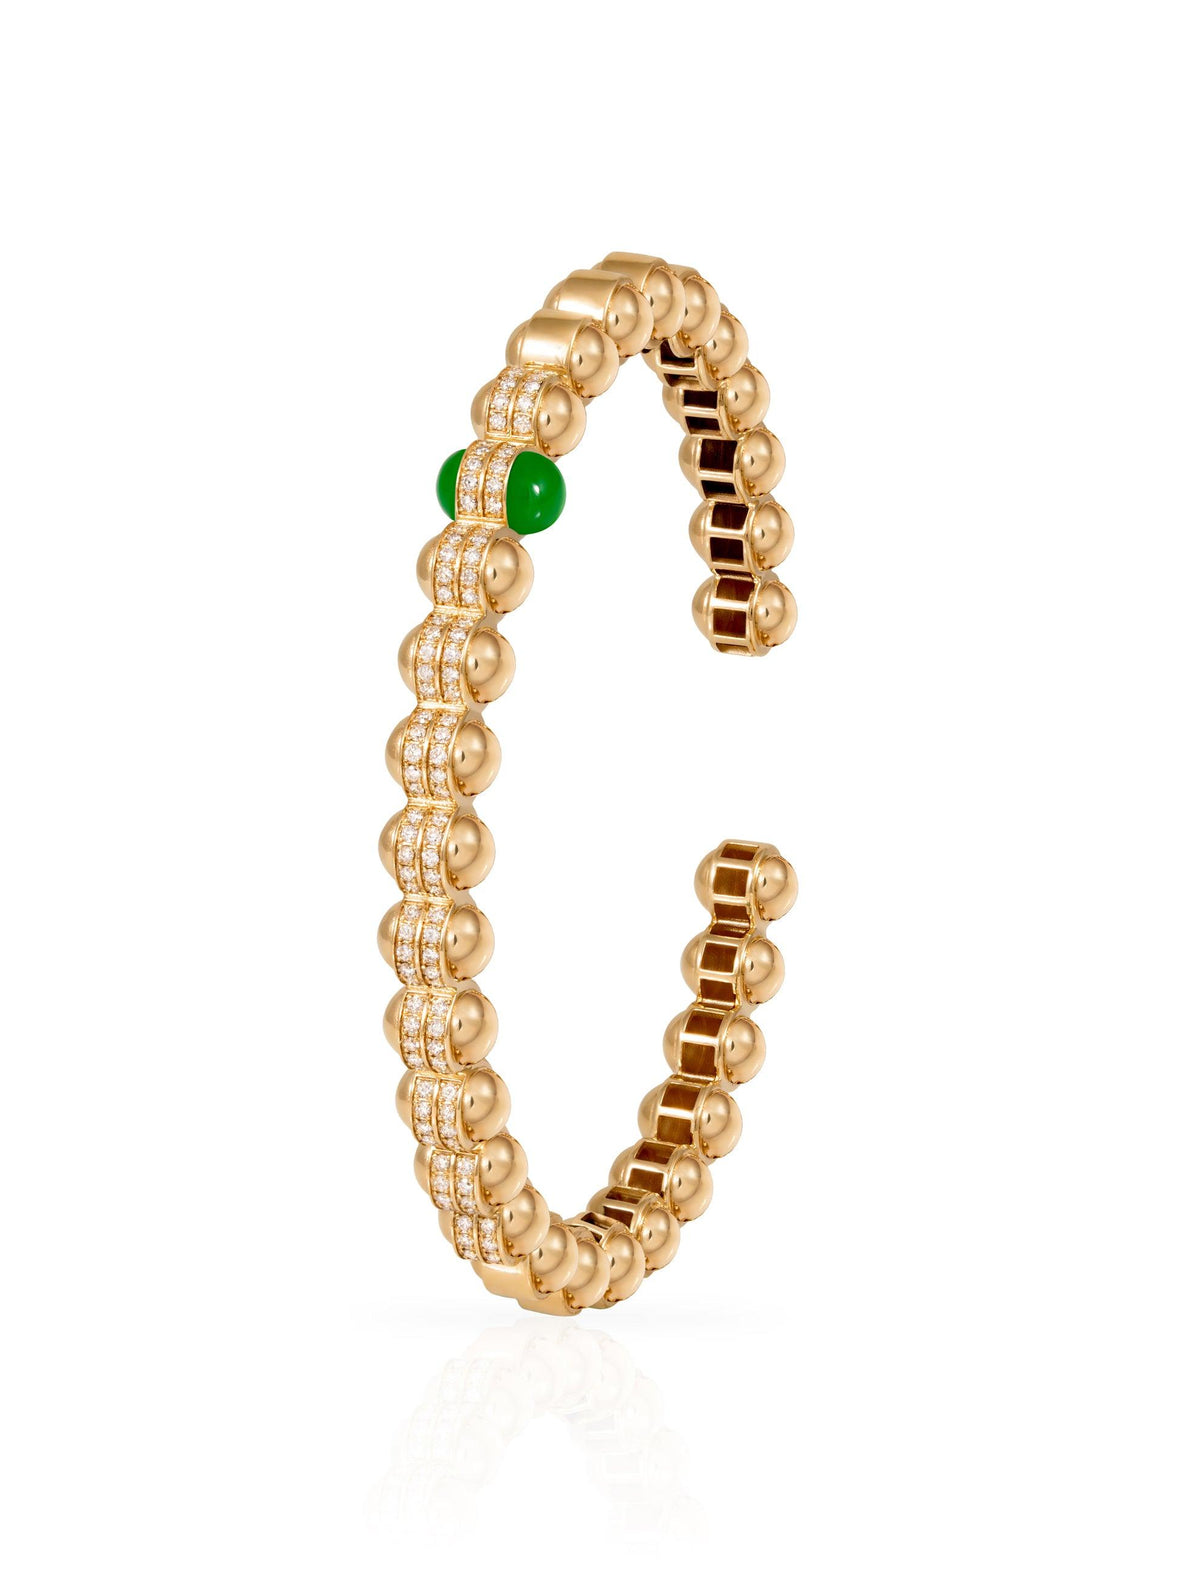 The Chlorine Gold Bangle by L'Atelier Nawbar (Size 2) - Tales of Stones